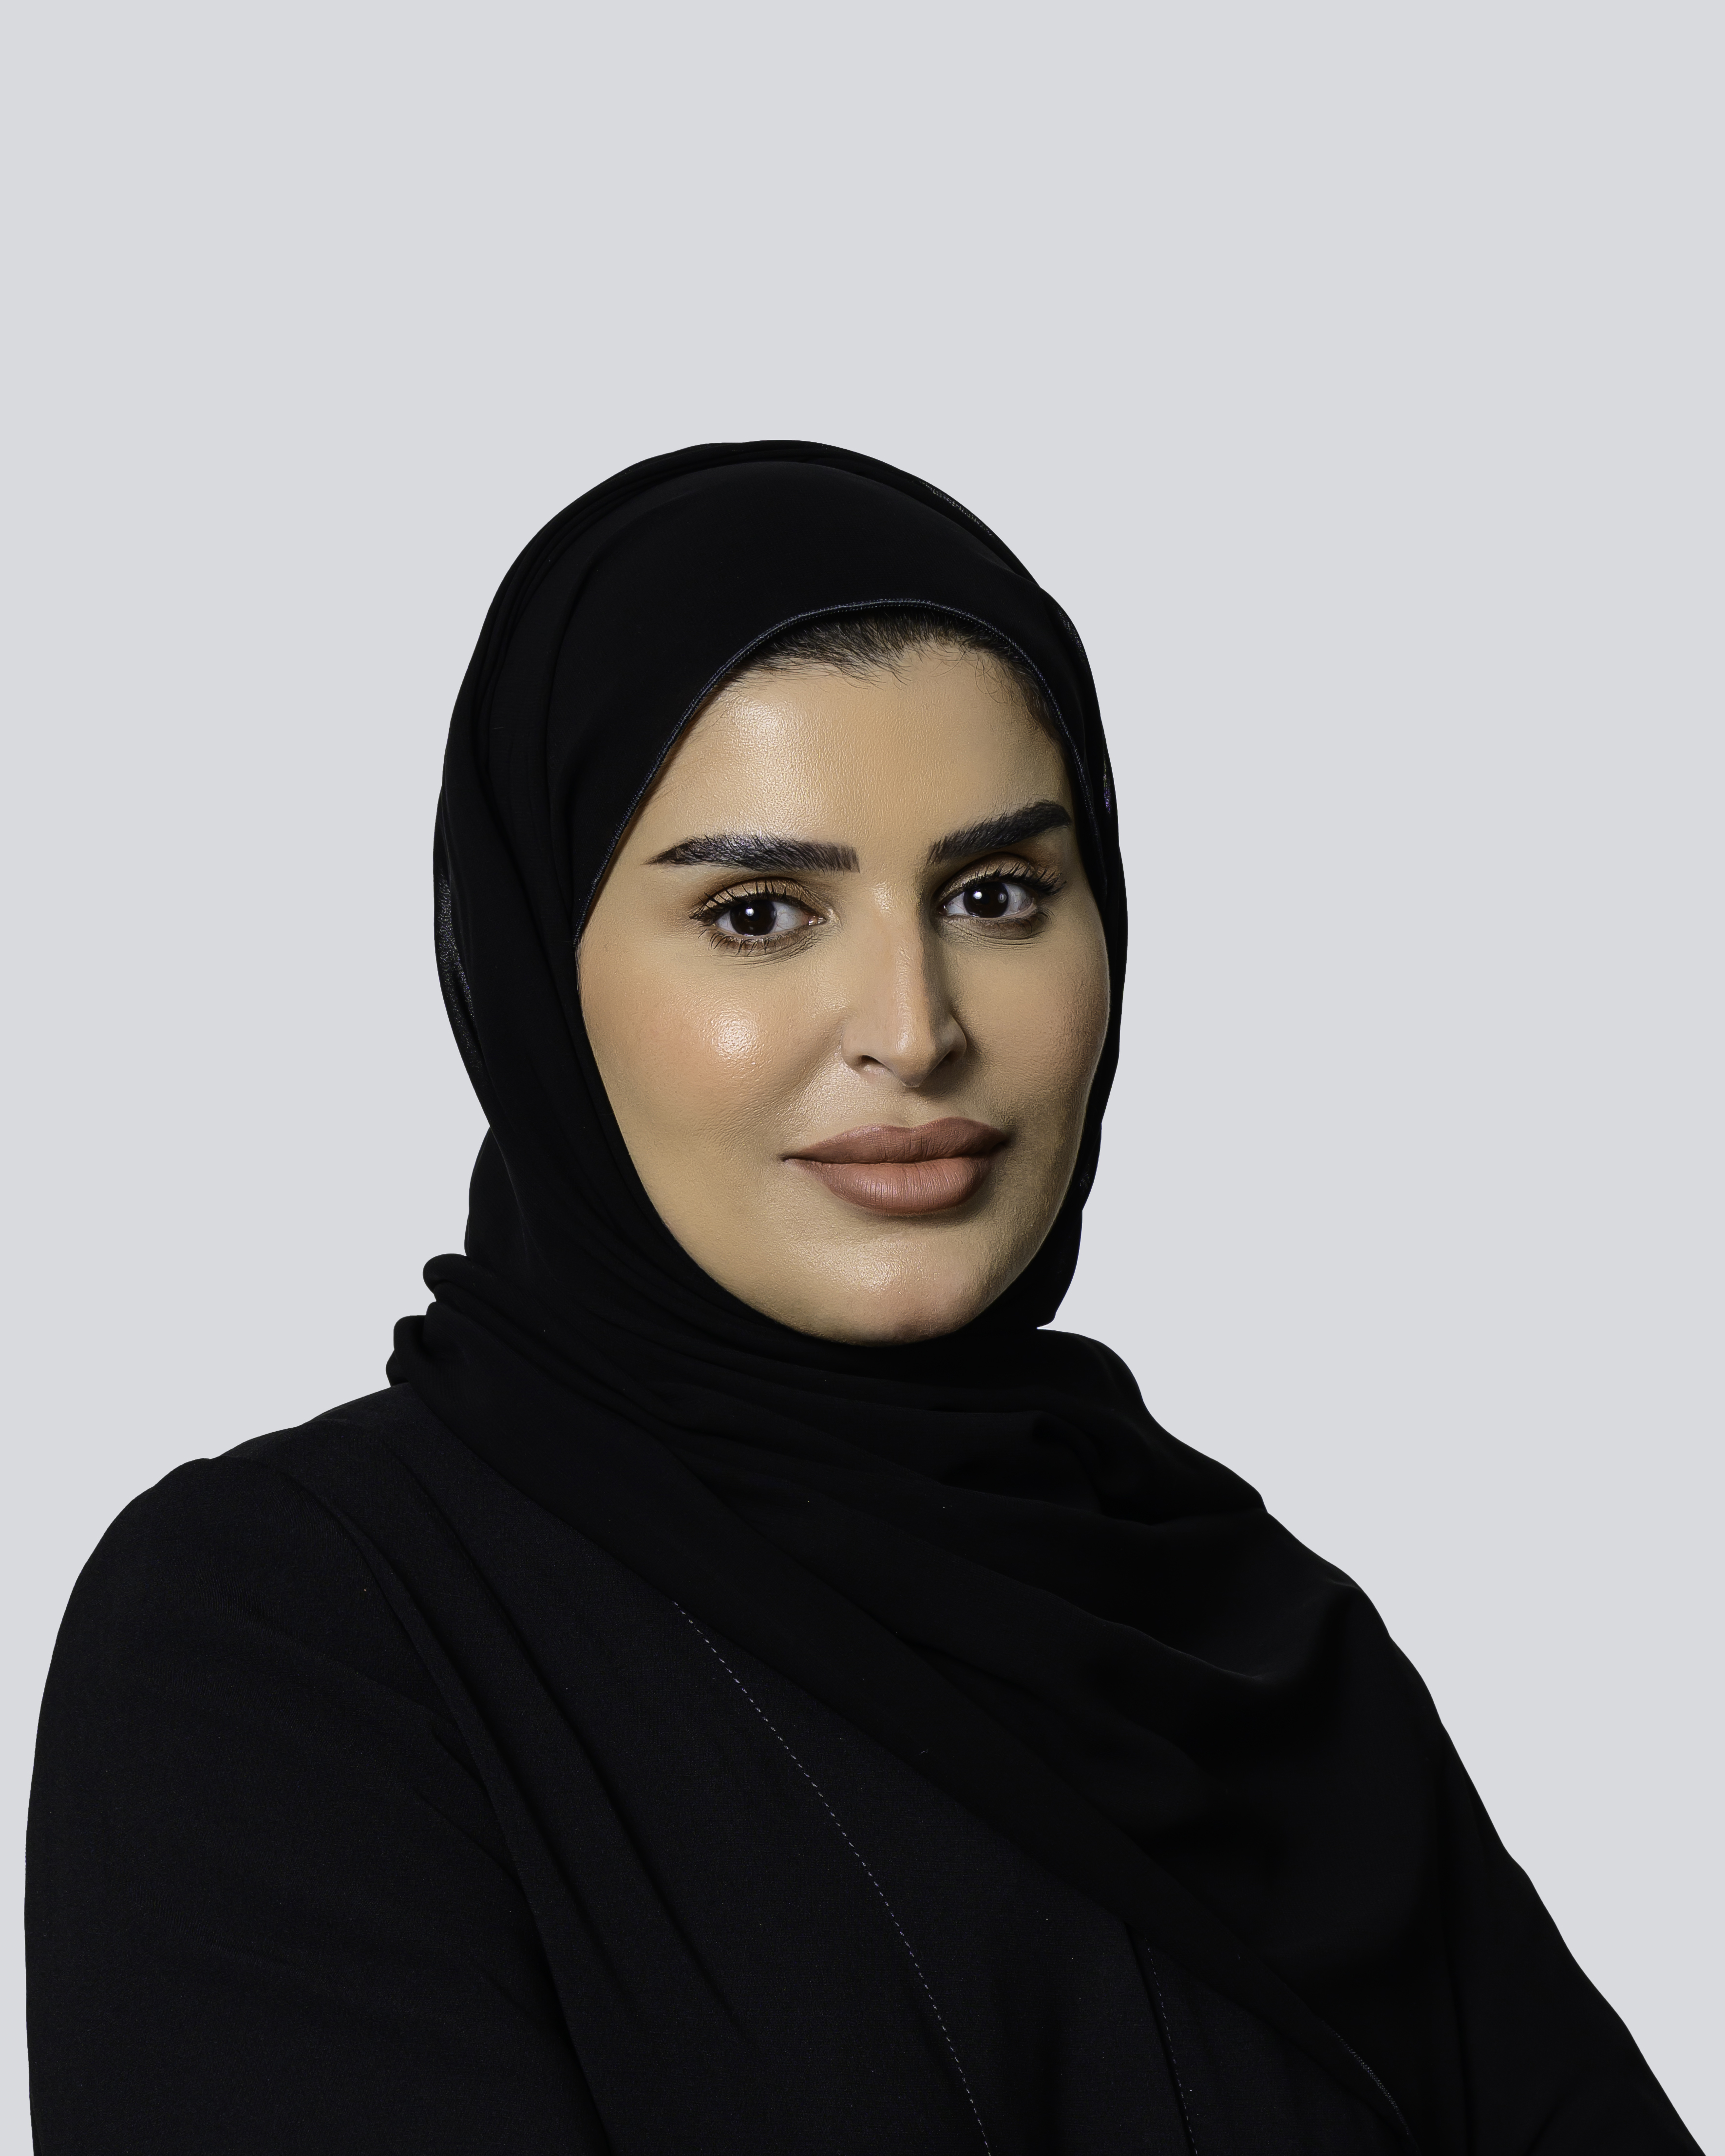 His Excellency the Minister of Social Development and Family/Maryam bint Ali bin Nasser Al-Misnad